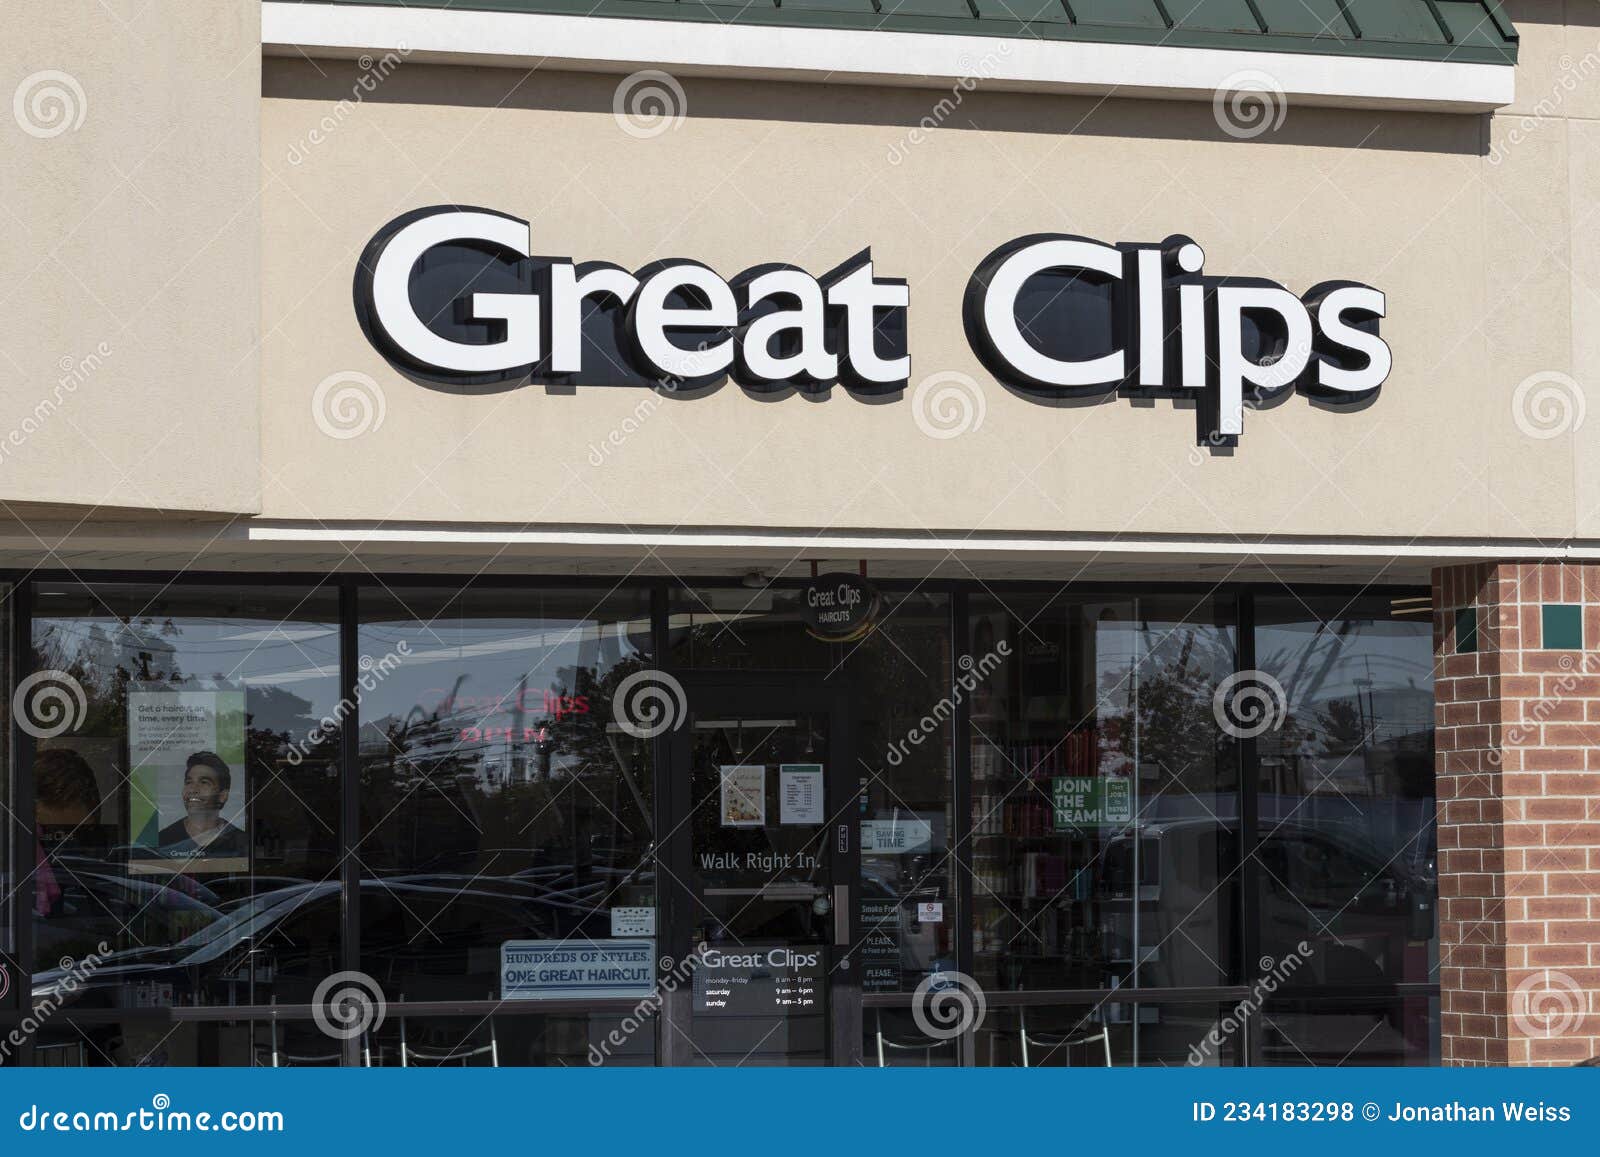 Great Clips - wide 3